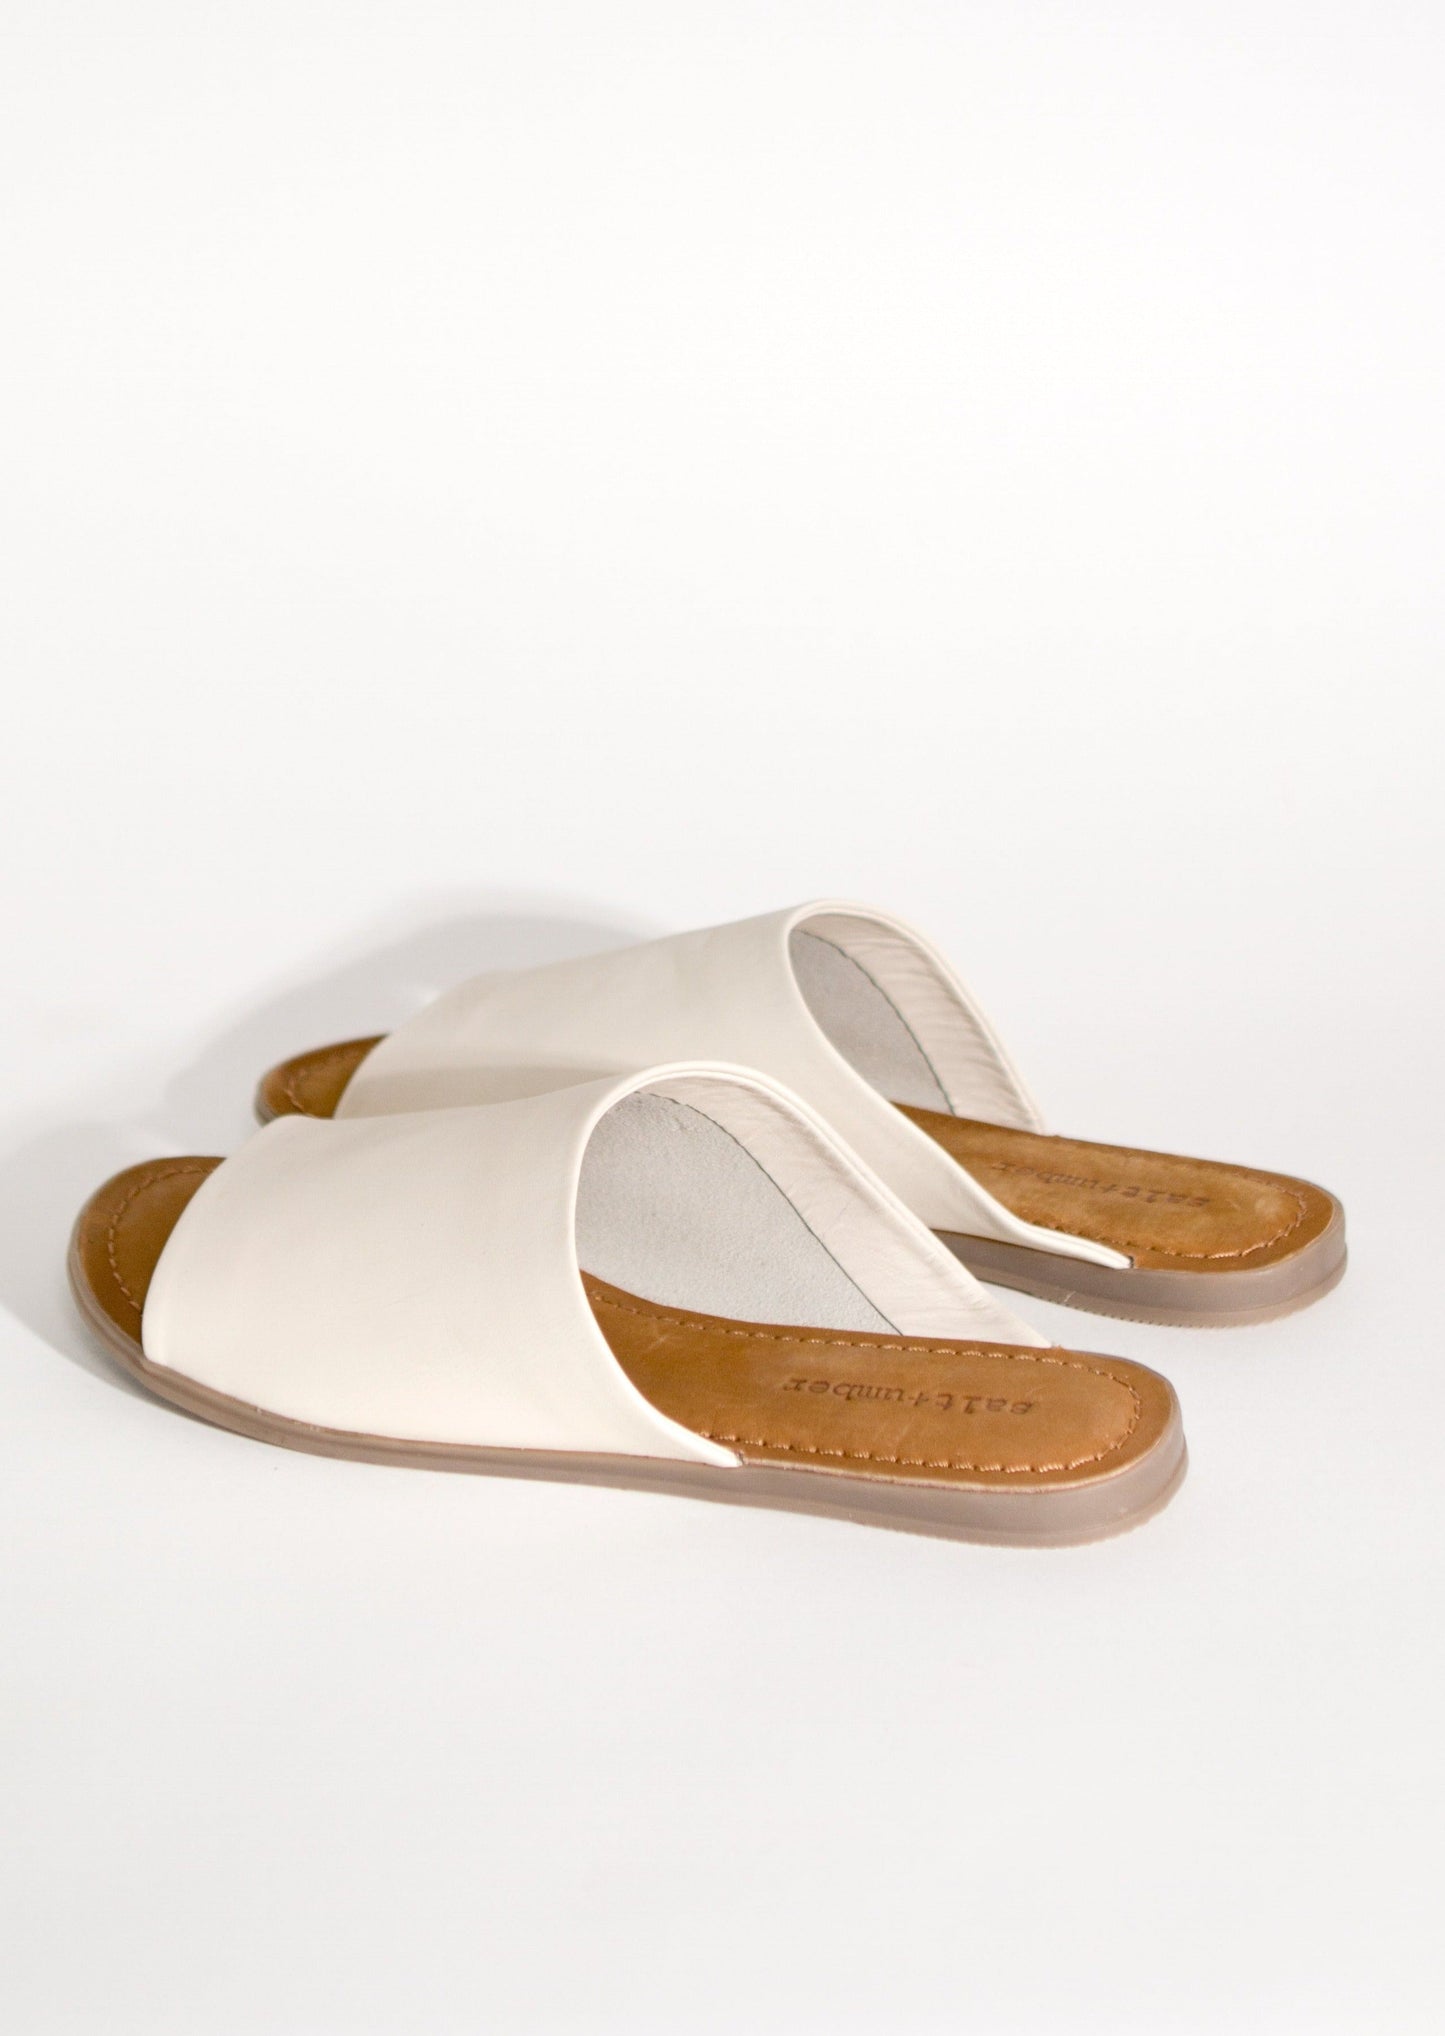 salt + umber -Thoughtfully + Ethically Handcrafted, sustainable shoes and accessories